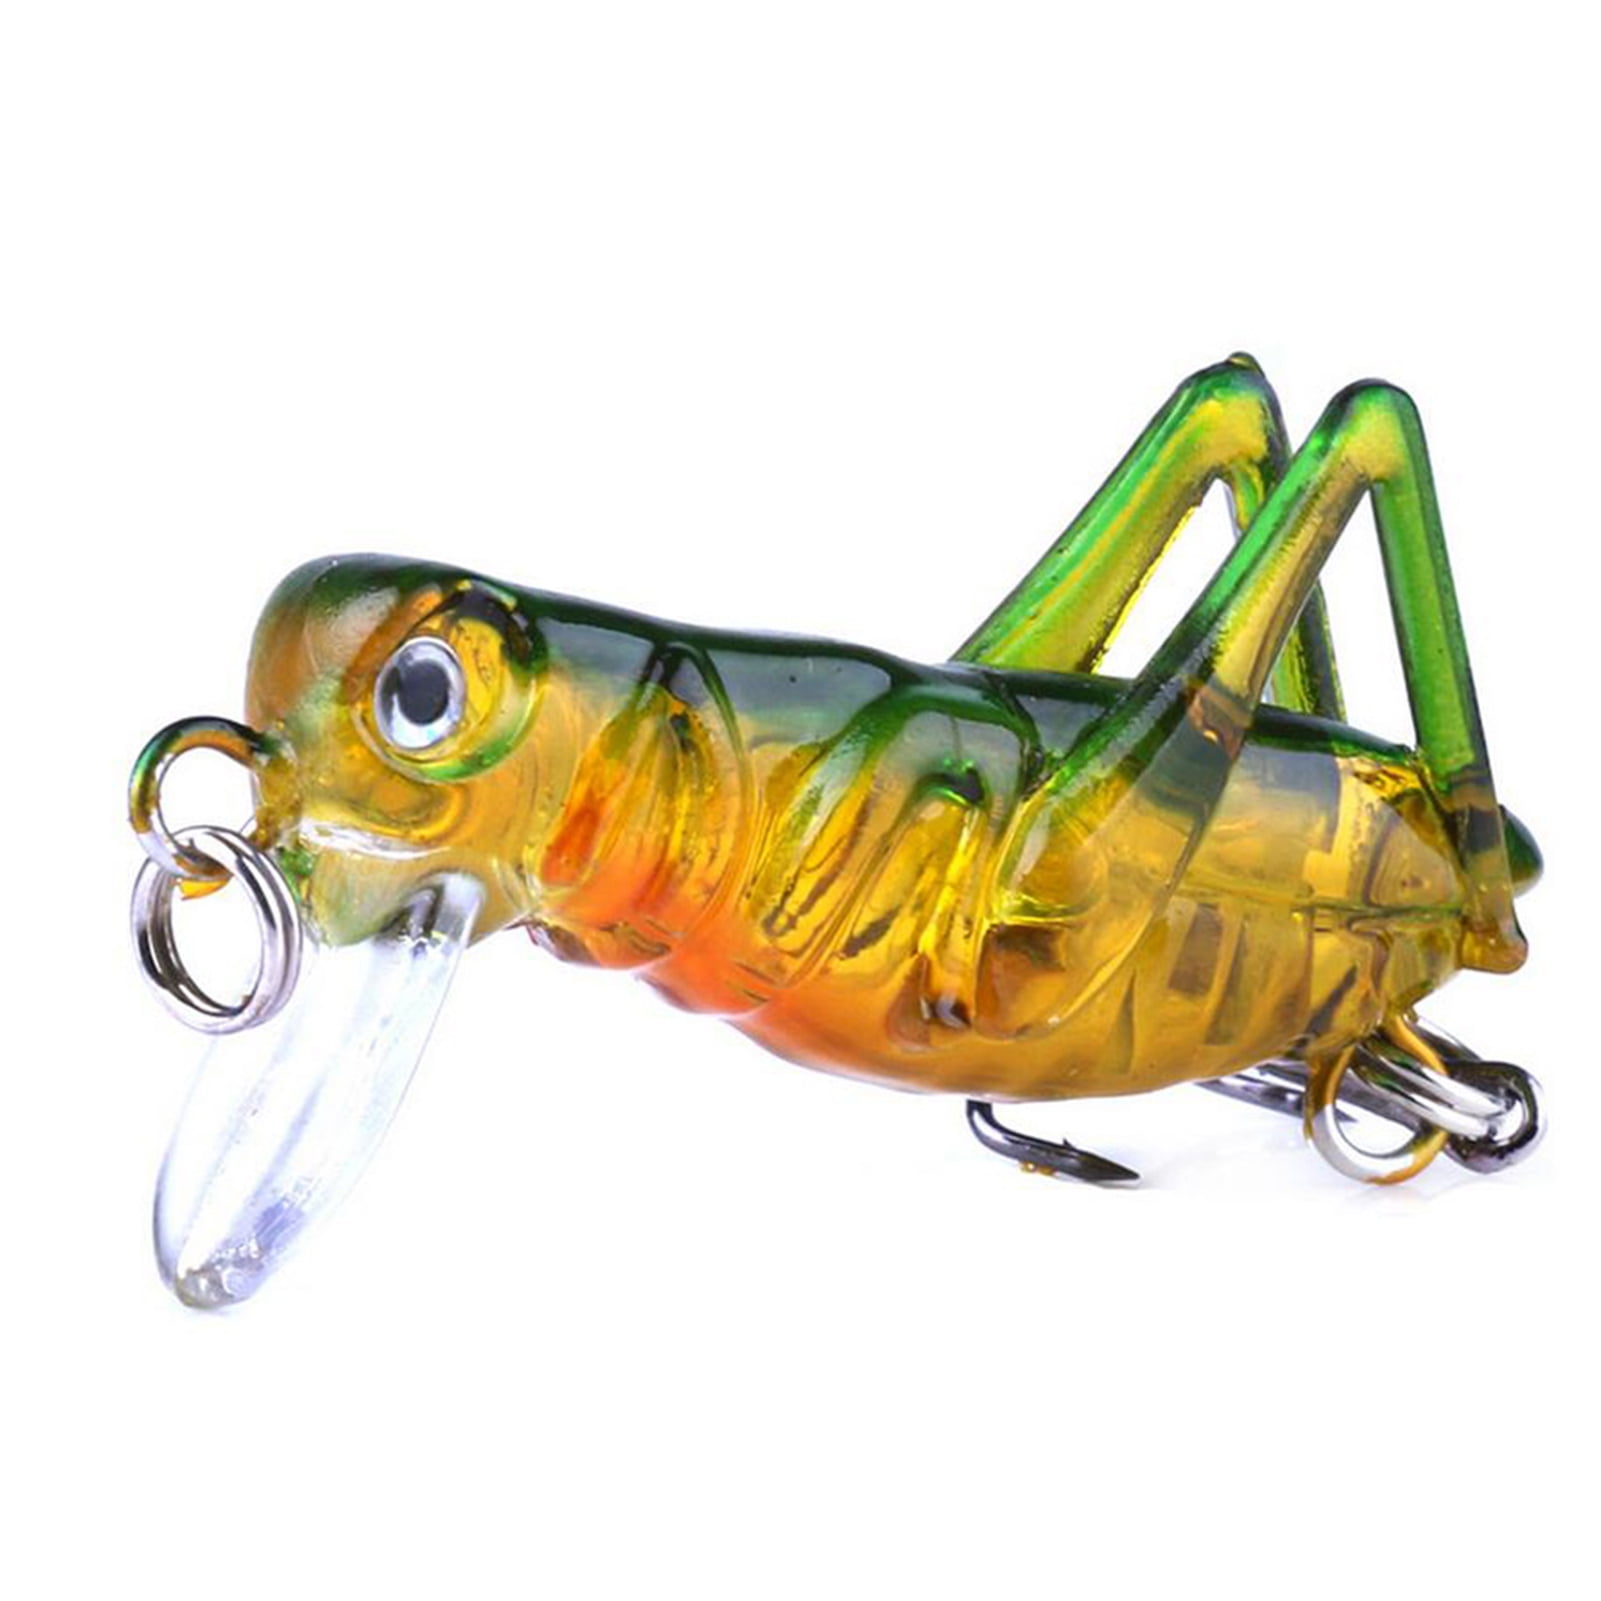 5pcs 3D Eyes Grasshopper/Locust Worm Fishing Lures Artificial Baits Flying Water